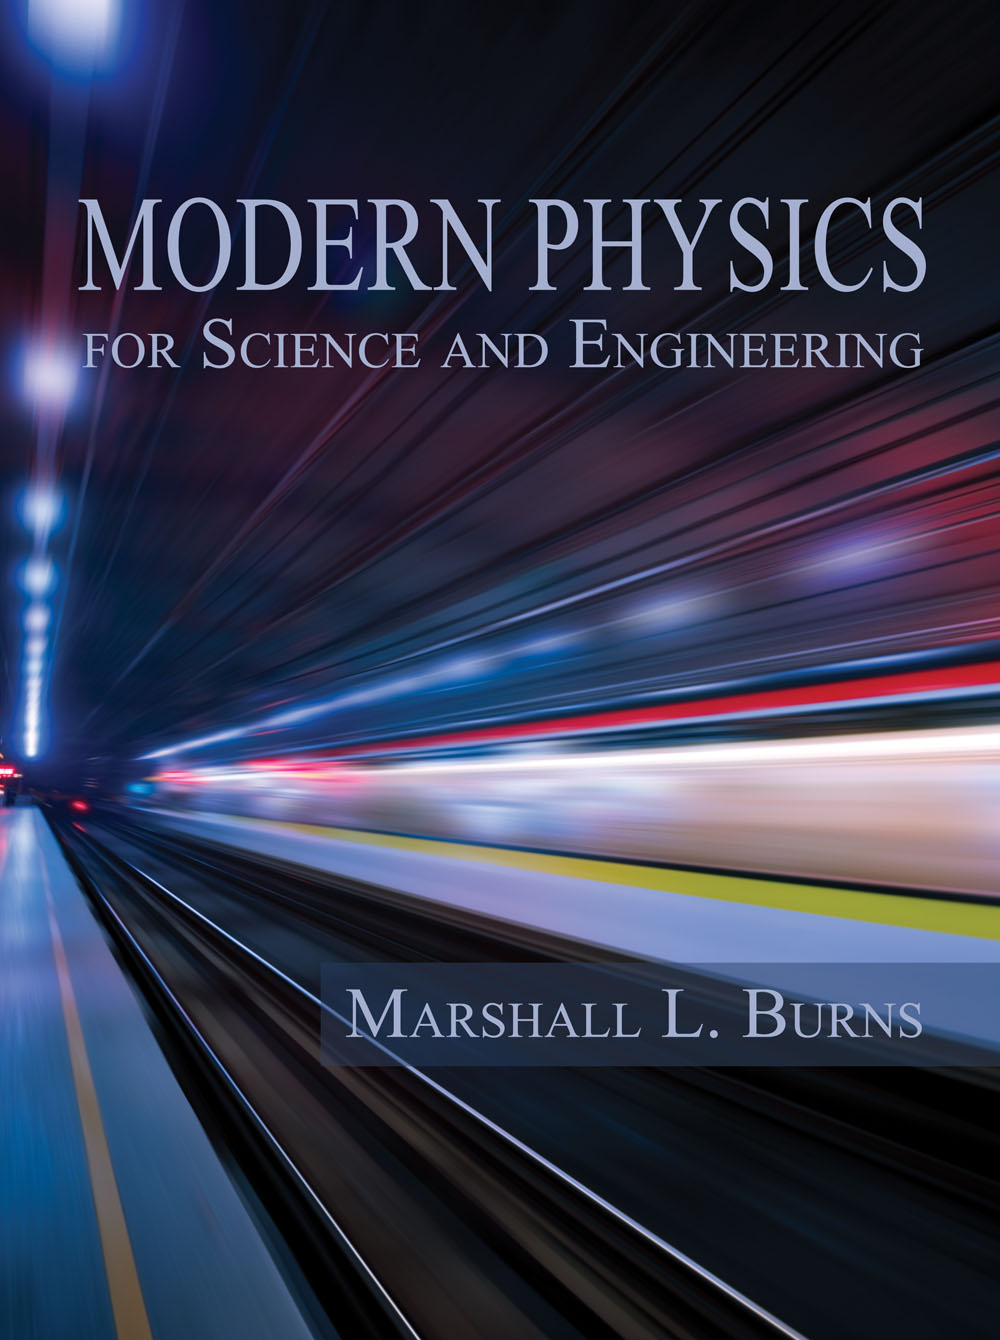 physics curriculum  u0026 instruction  u2014 modern physics for science and engineering